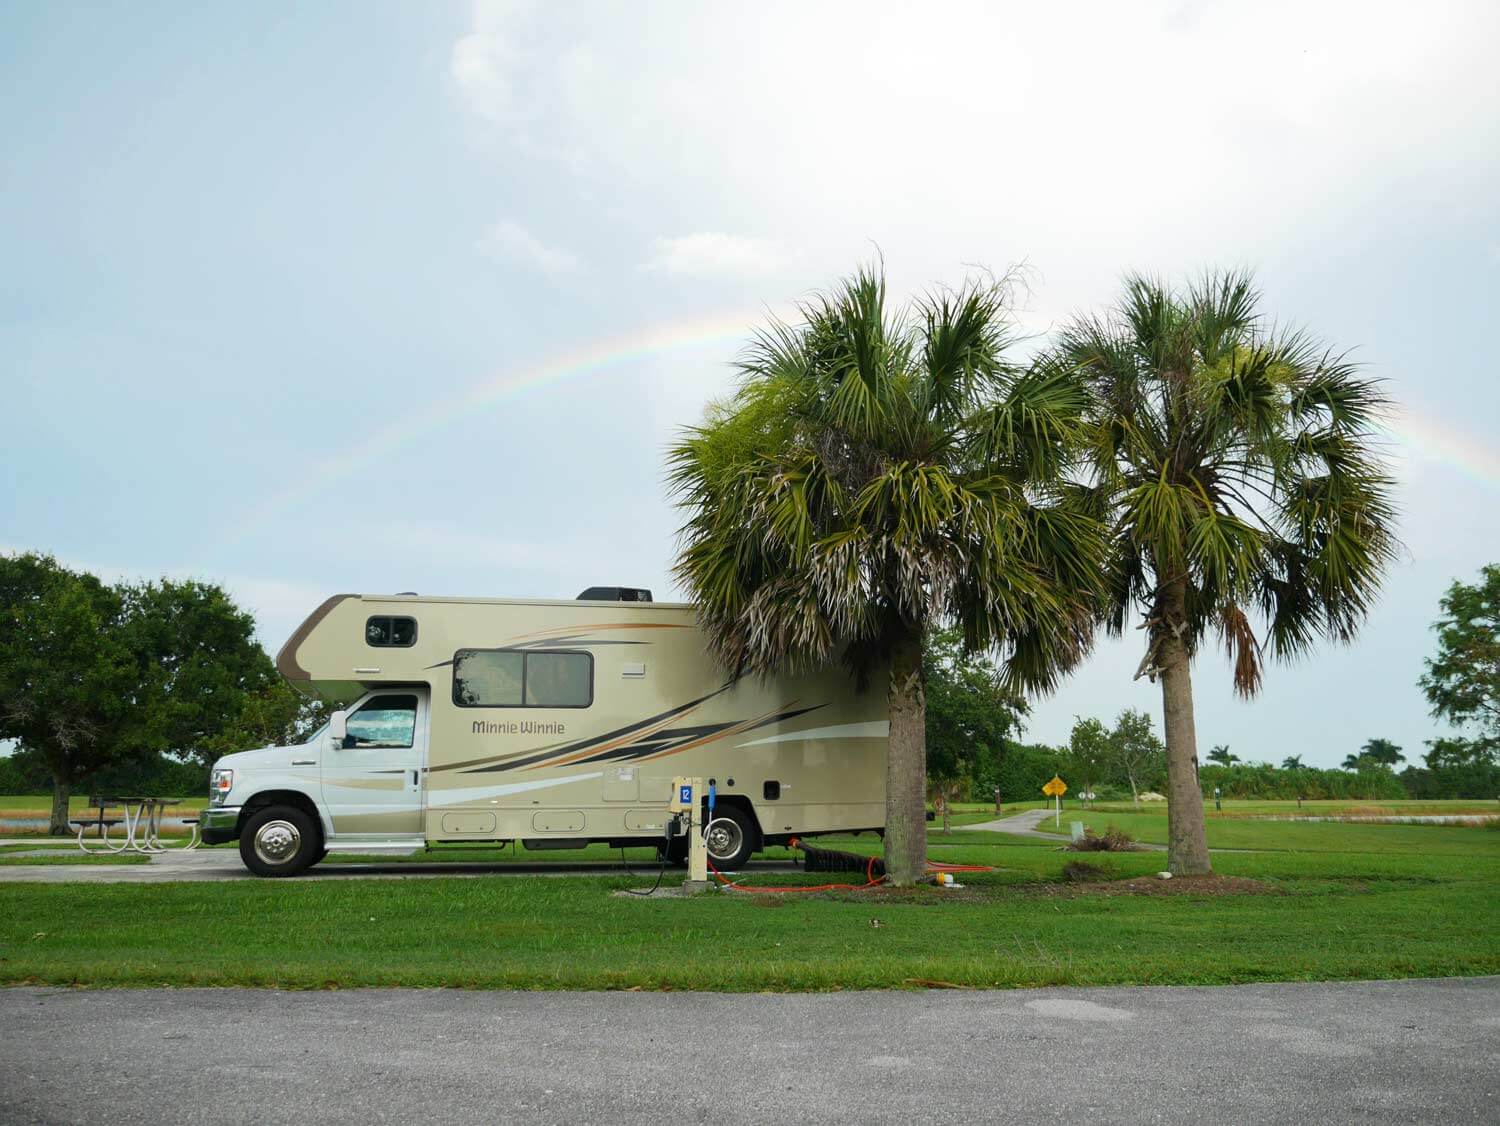 Motorhome parked in a campsite with rainbow in the background